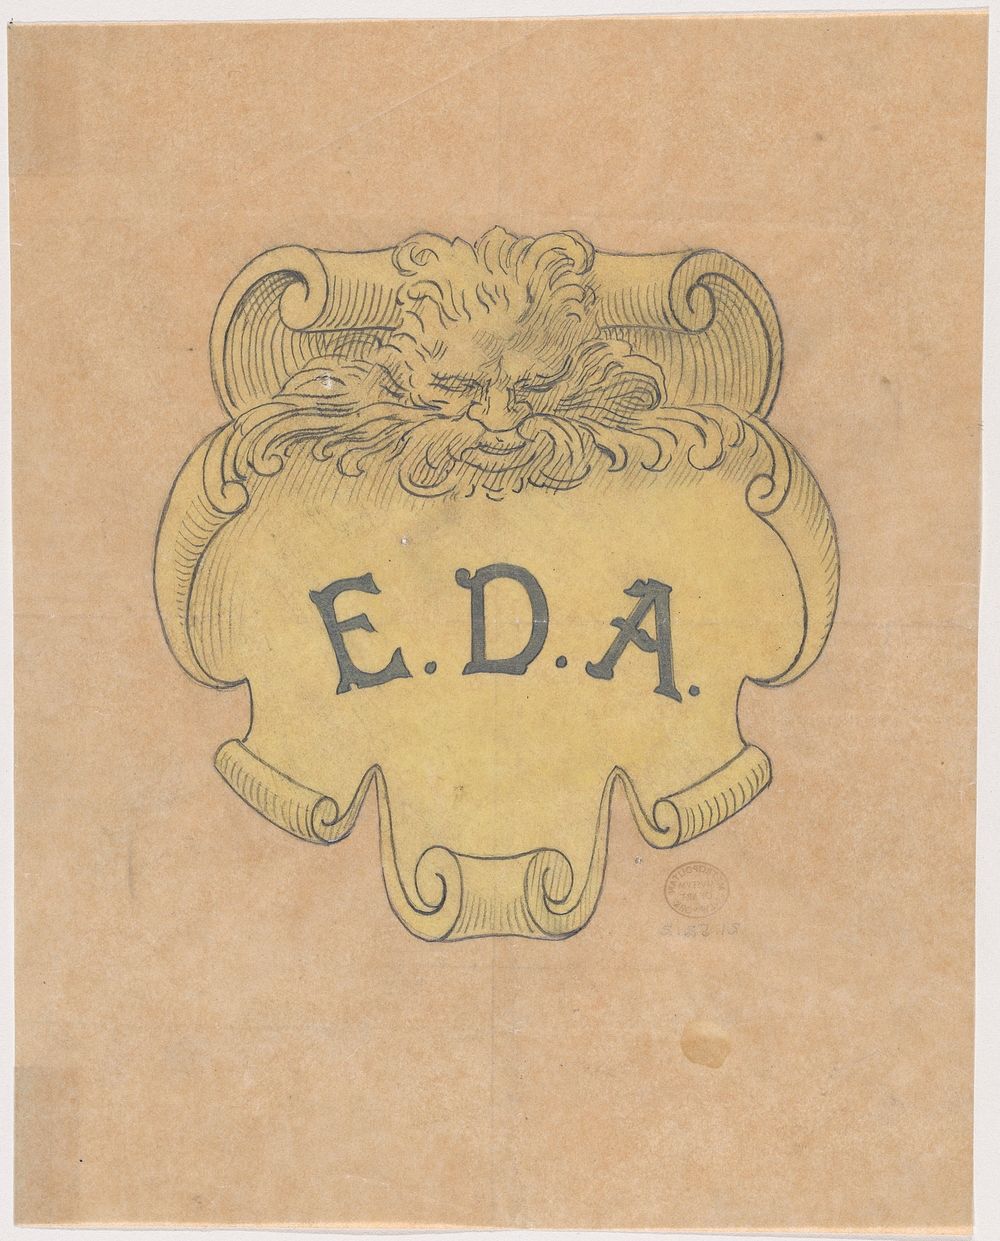 Study for a bronze name plate for Edward D. Adams